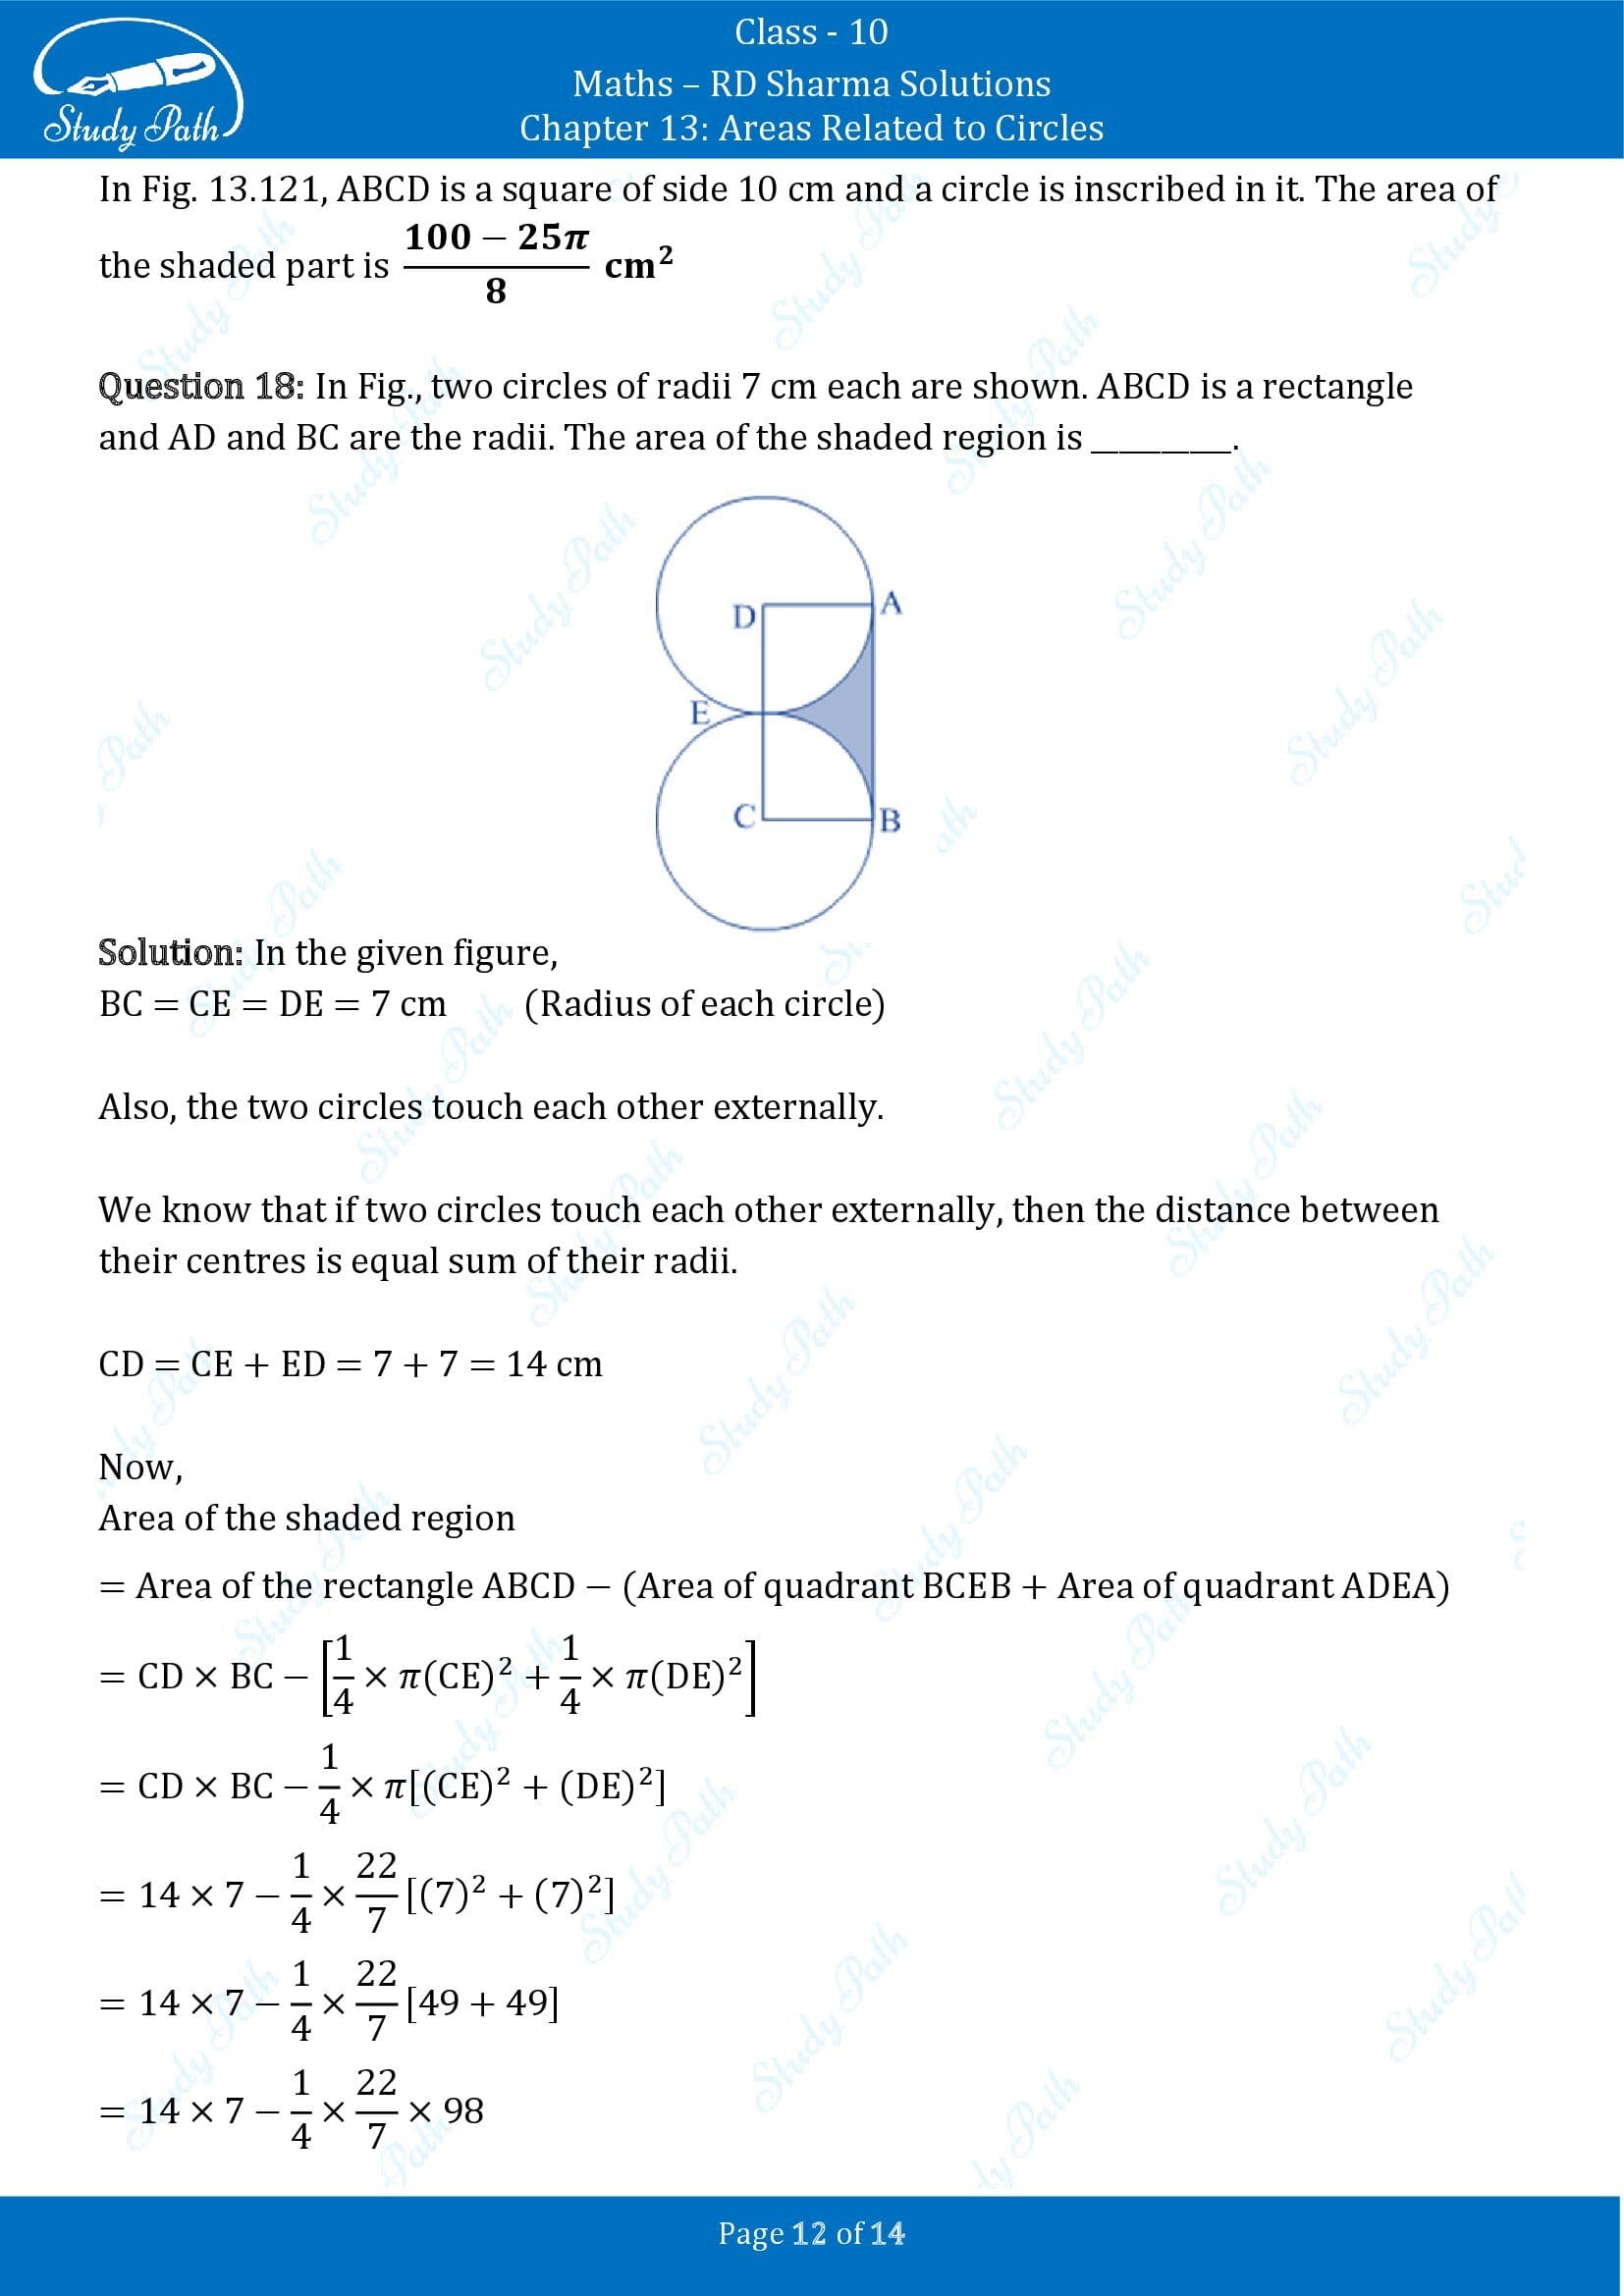 RD Sharma Solutions Class 10 Chapter 13 Areas Related to Circles Fill in the Blank Type Questions FBQs 00012